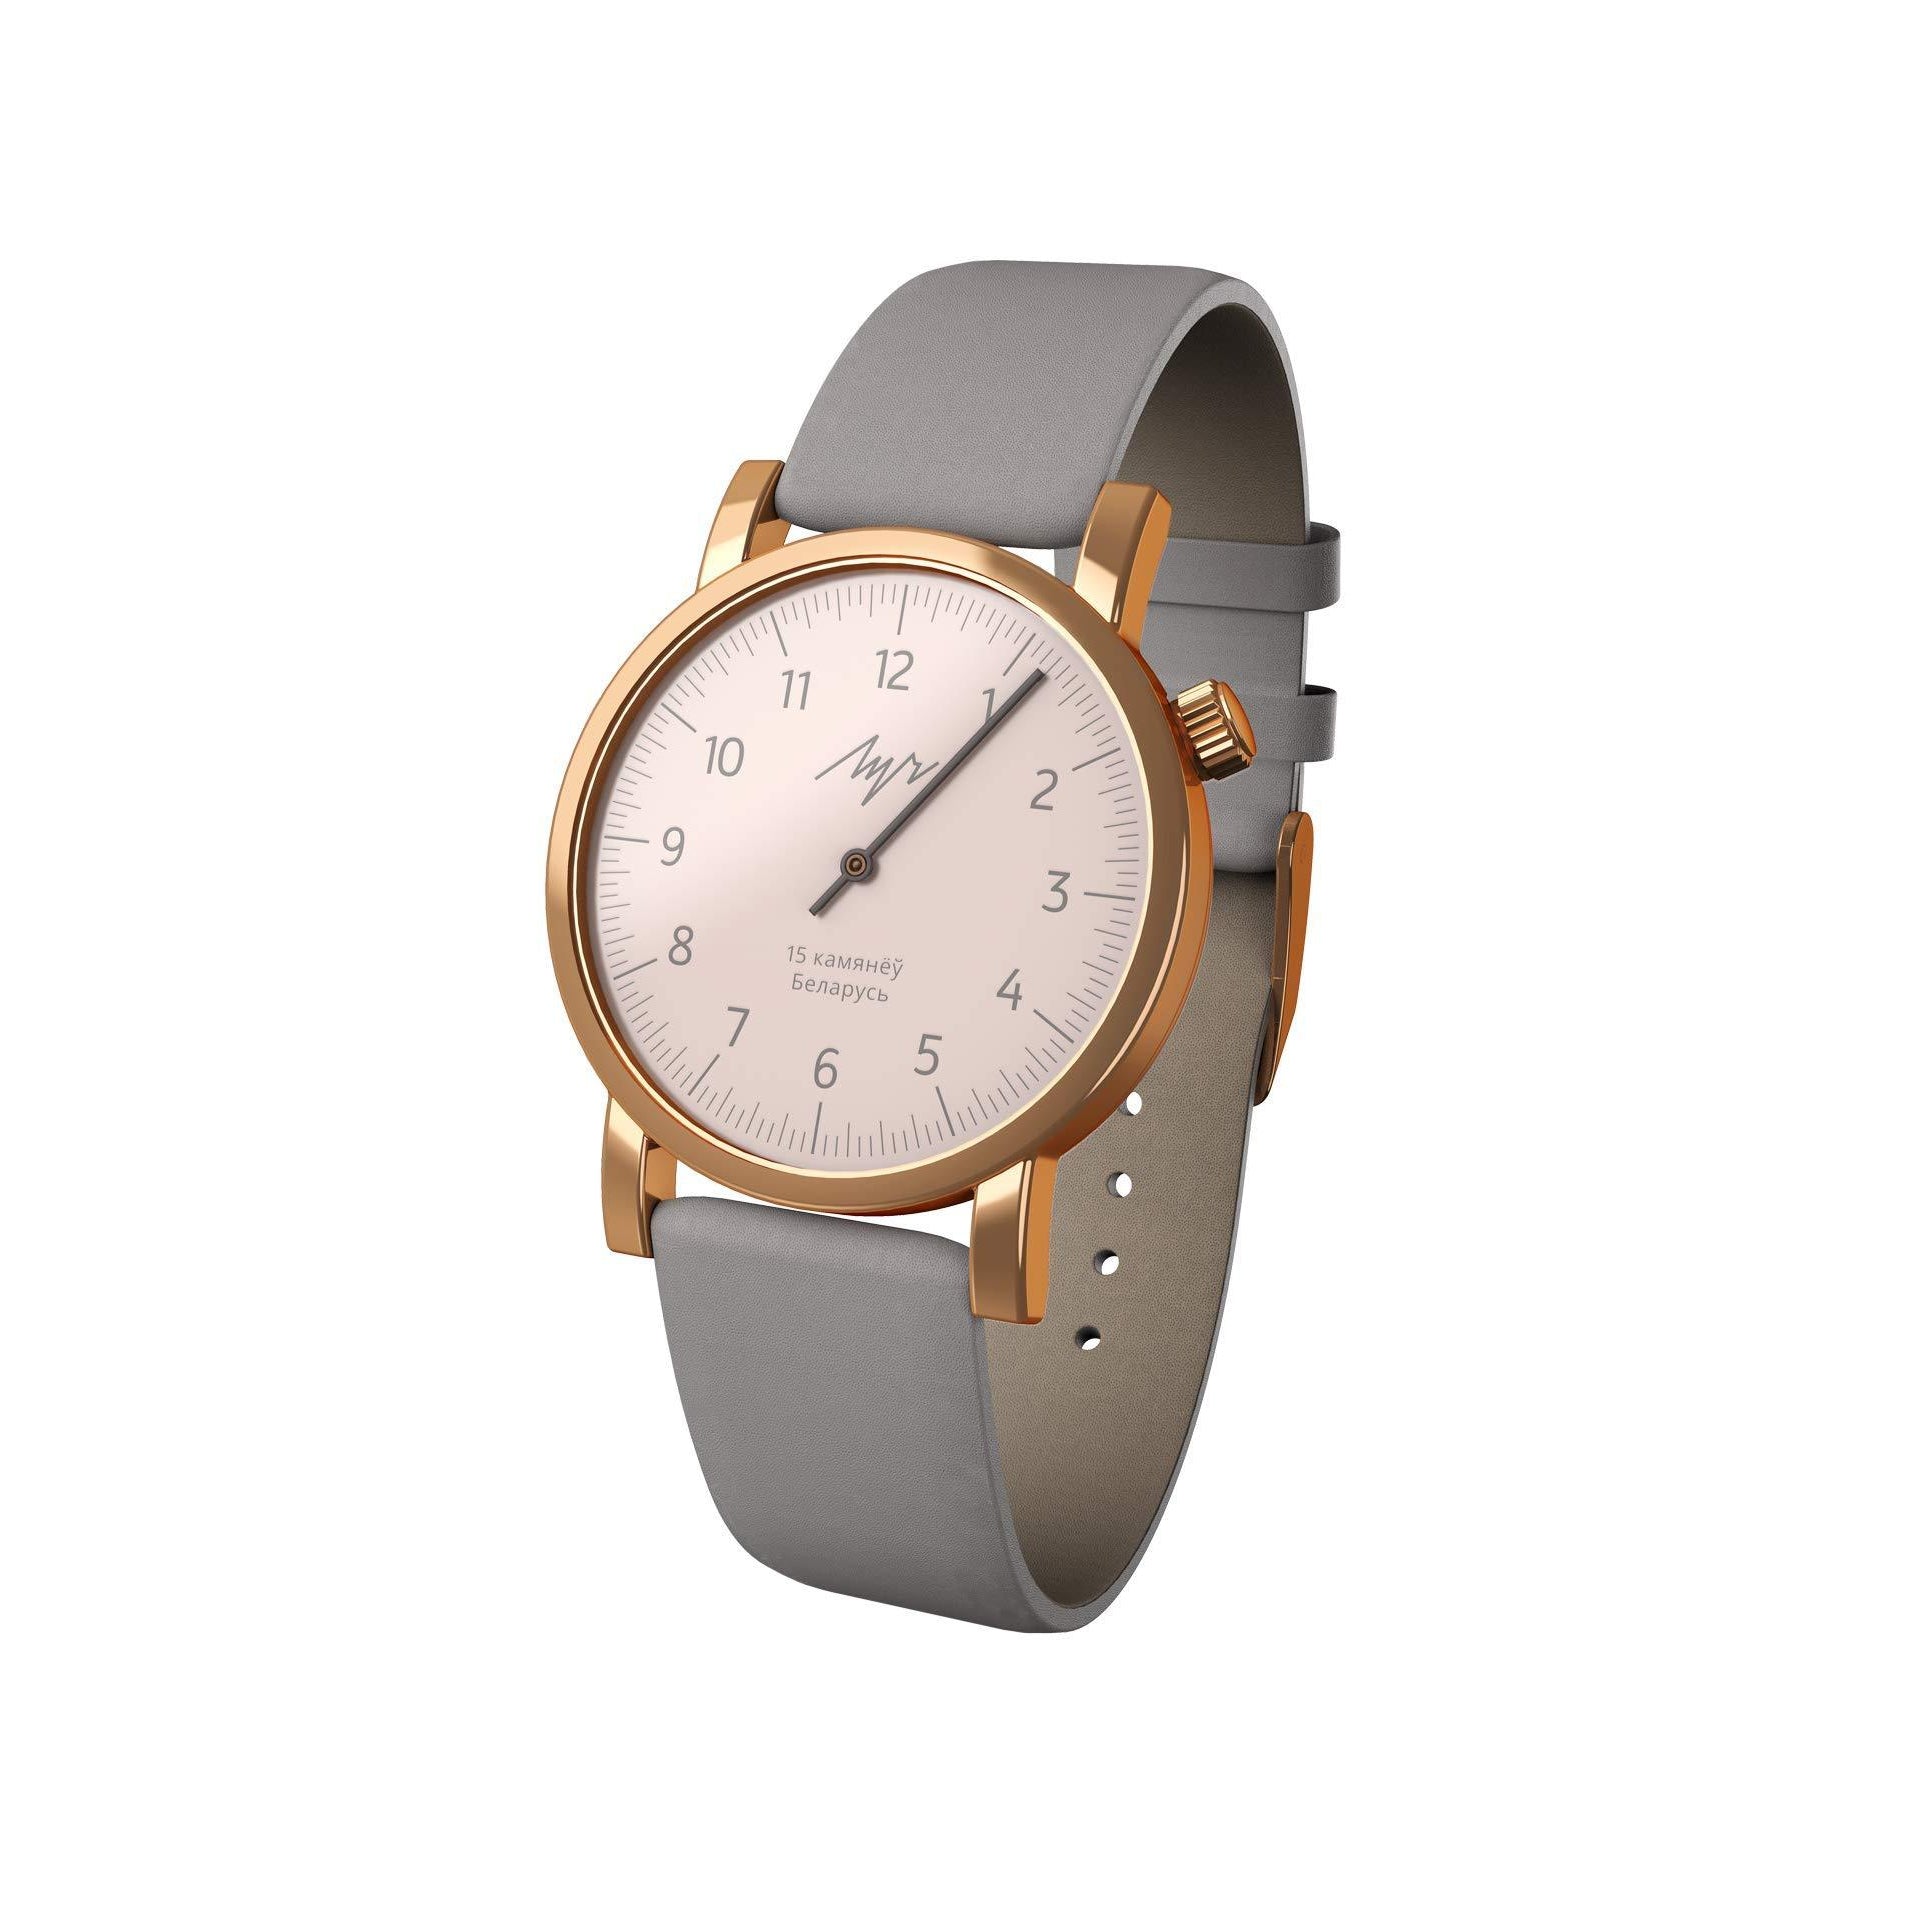 Luch Handwinding One-Handed Watch, Gold Plated - 015236757